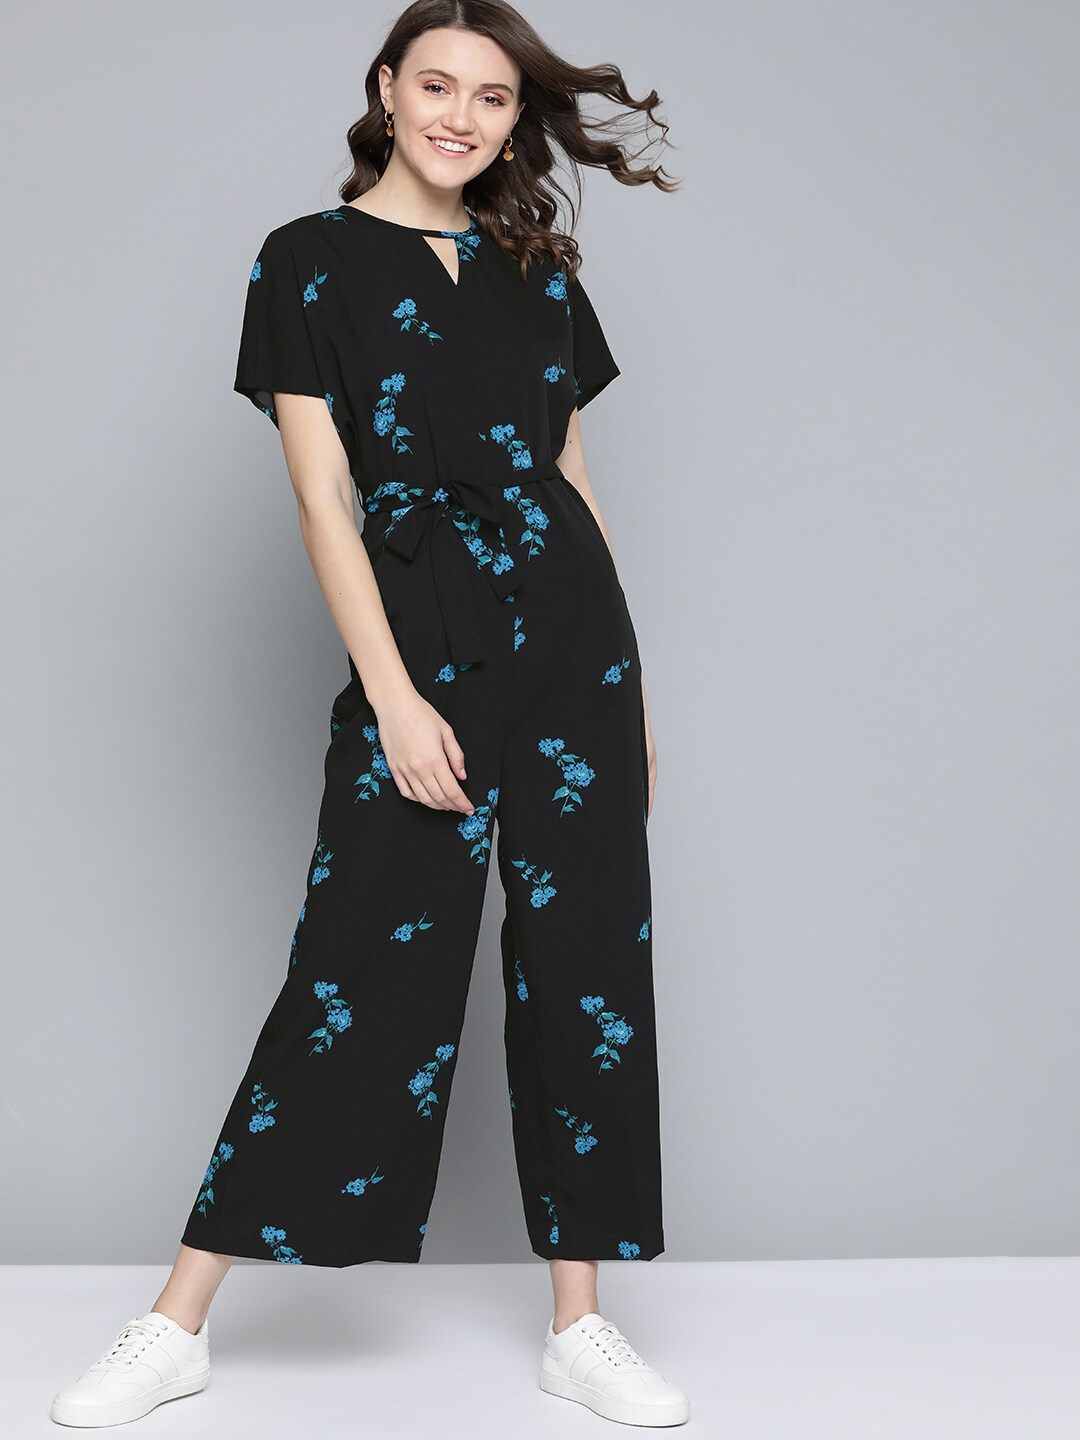 Mast & Harbour Black & Blue Floral Print Basic Jumpsuit with Belt Price in India